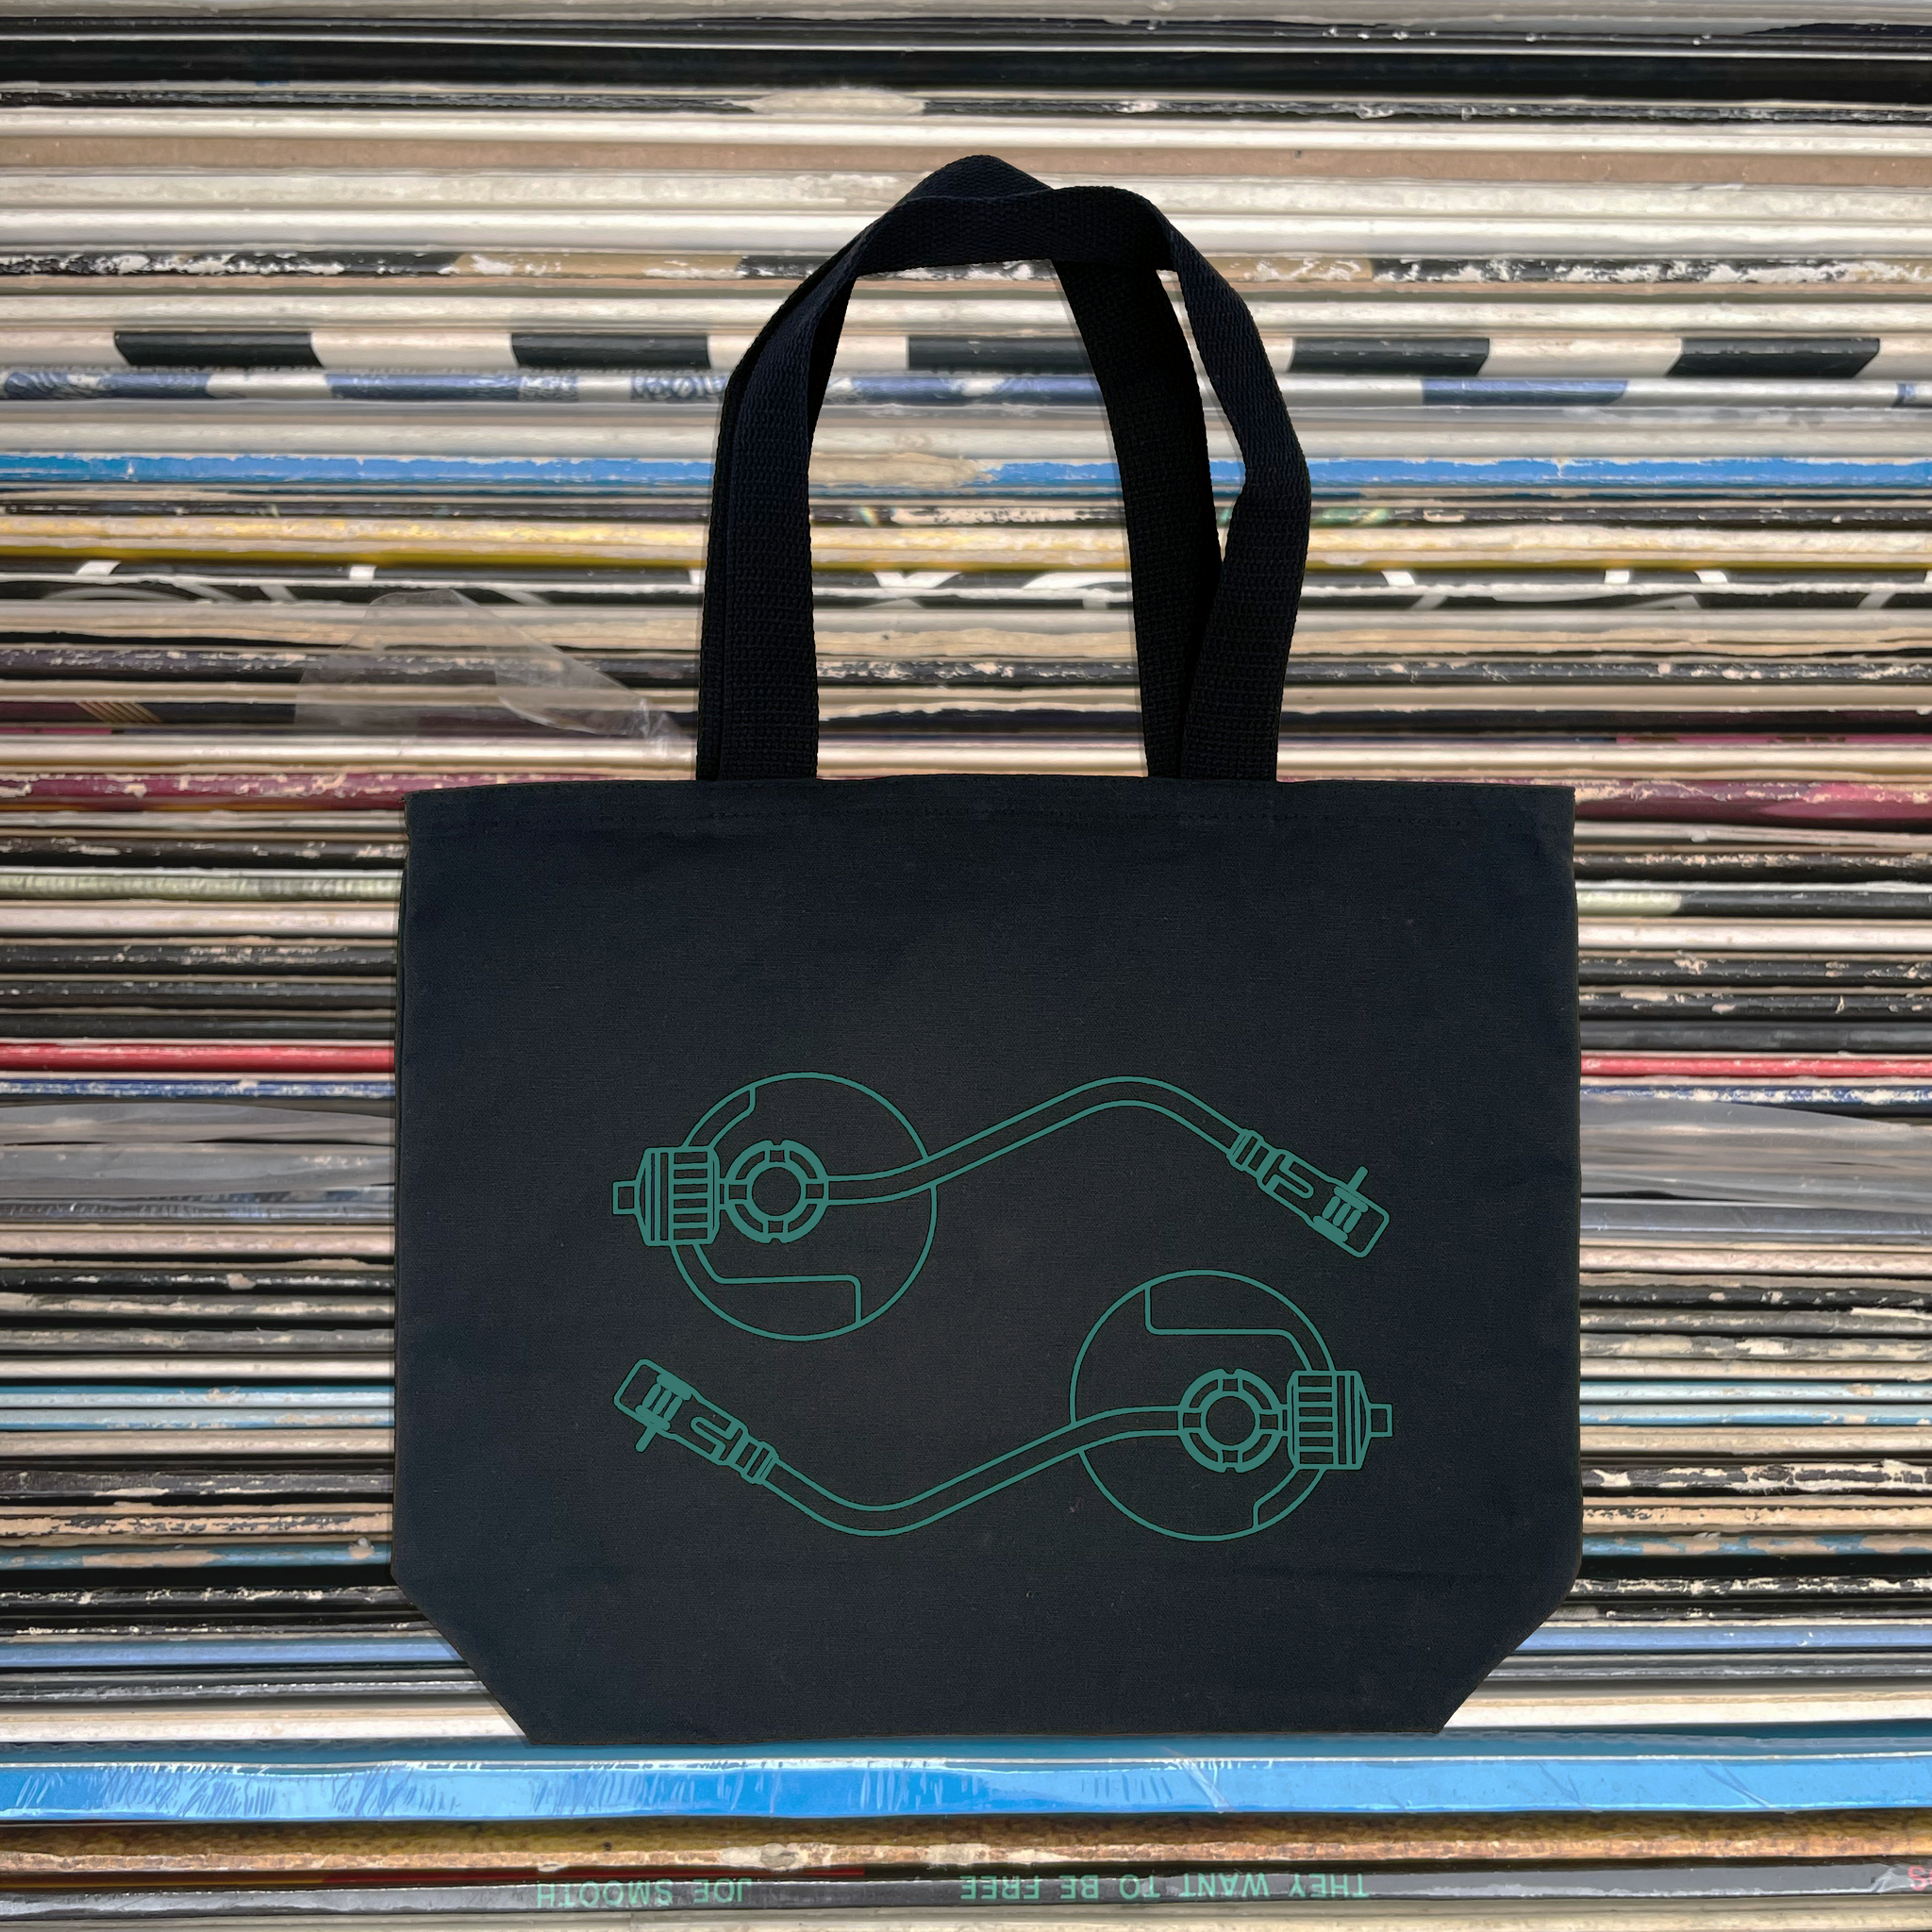 Very Special Record Tote